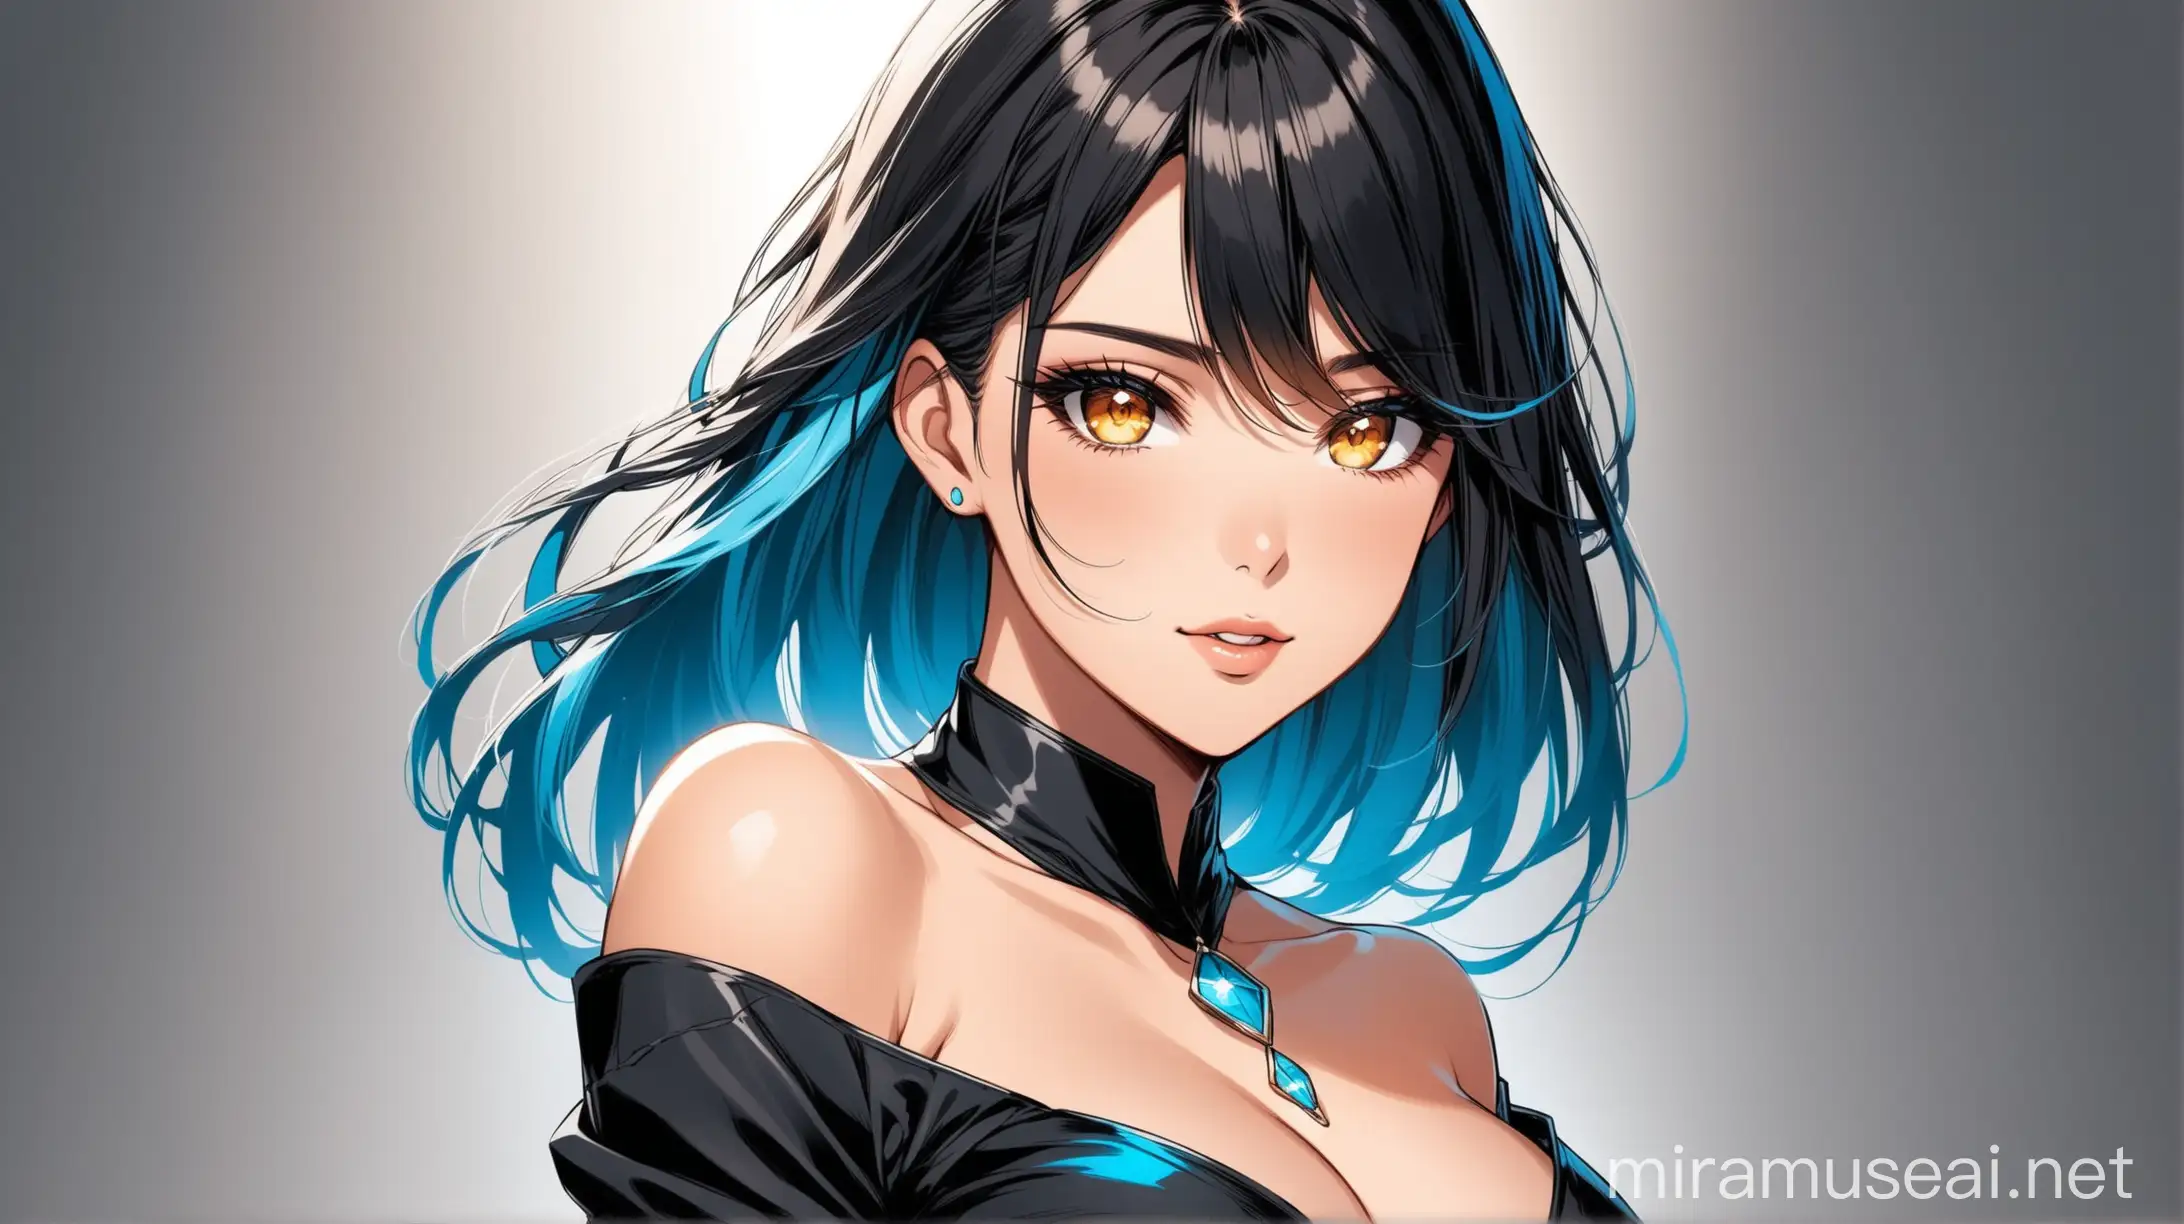 natural beauty with amber eyes and elegant black hairs with blue highlights
in a sexy outfit 